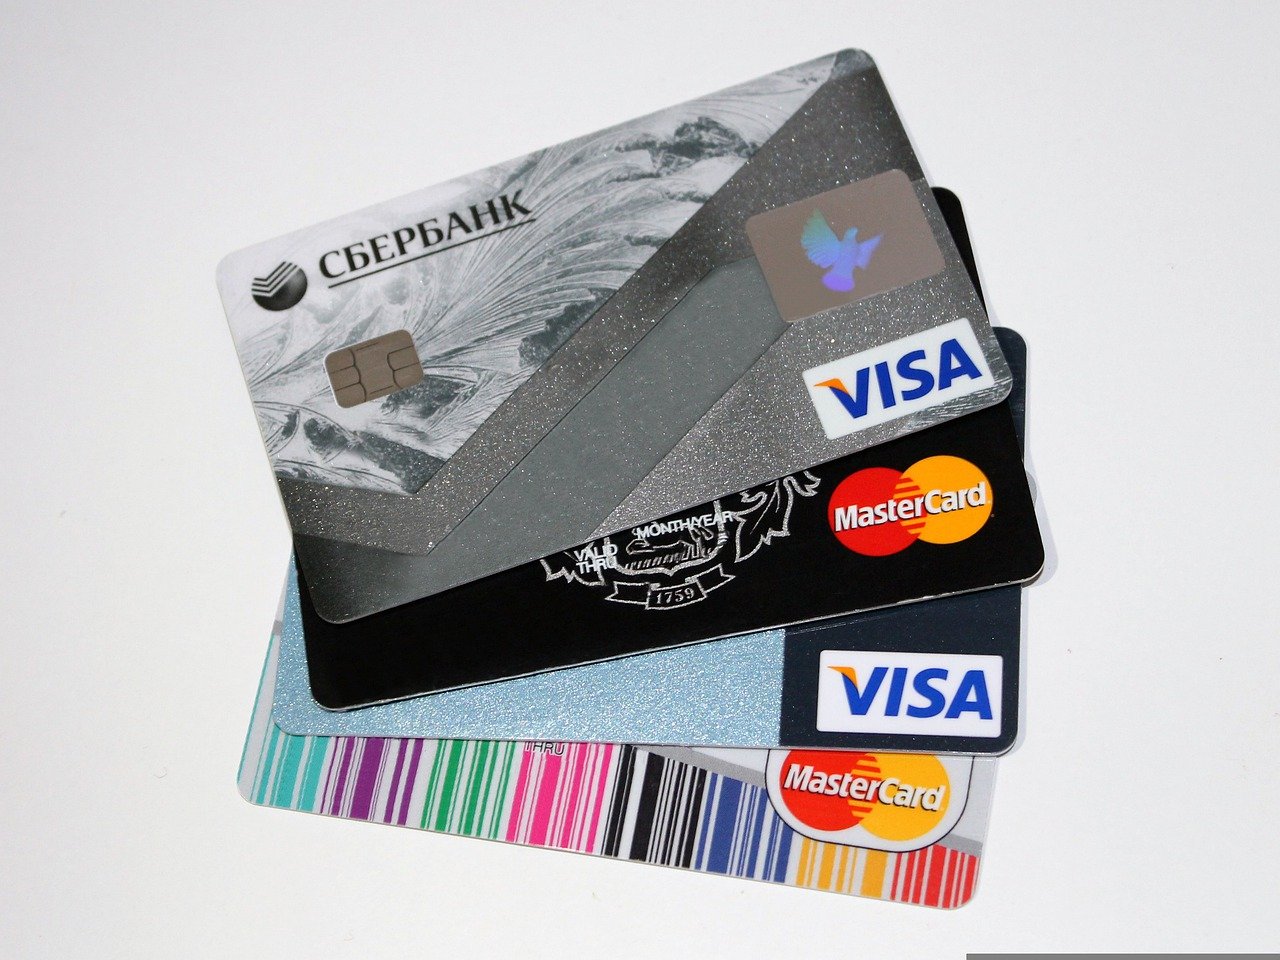 Pay Insurance Policy Premium with Credit Card